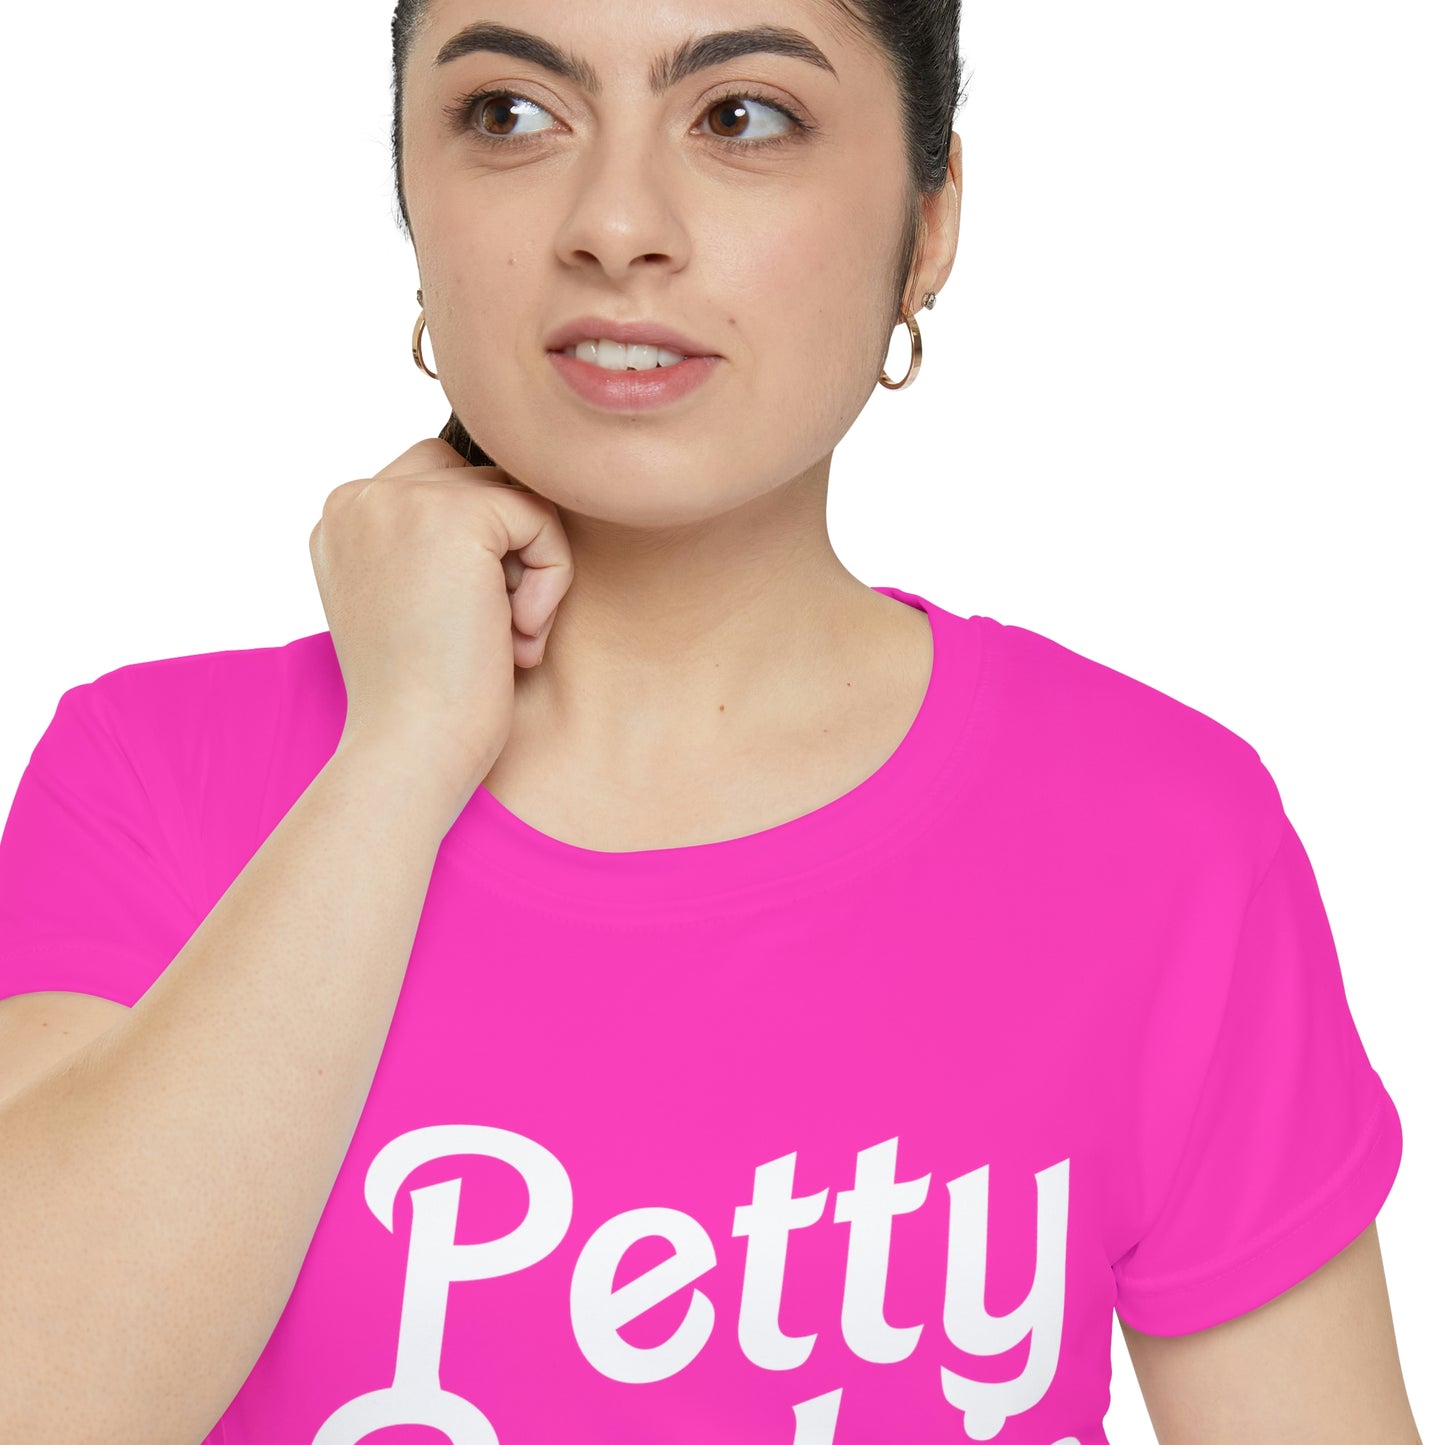 Petty Barbie, Bachelorette Party Shirts, Bridesmaid Gifts, Here comes the Party Tees, Group Party Favor Shirts, Bridal Party Shirt for women